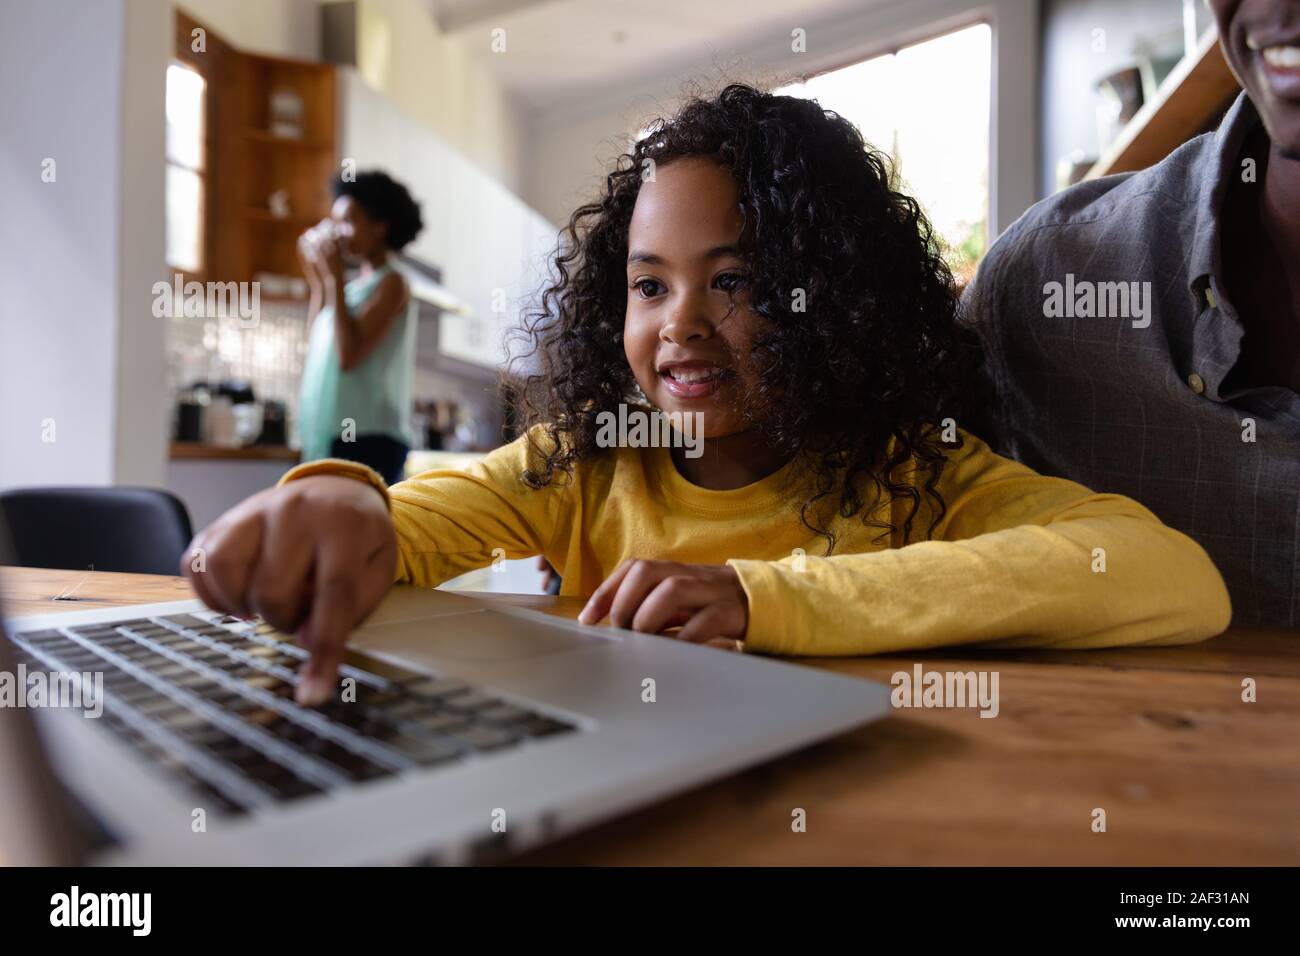 Family spending time in their home Stock Photo